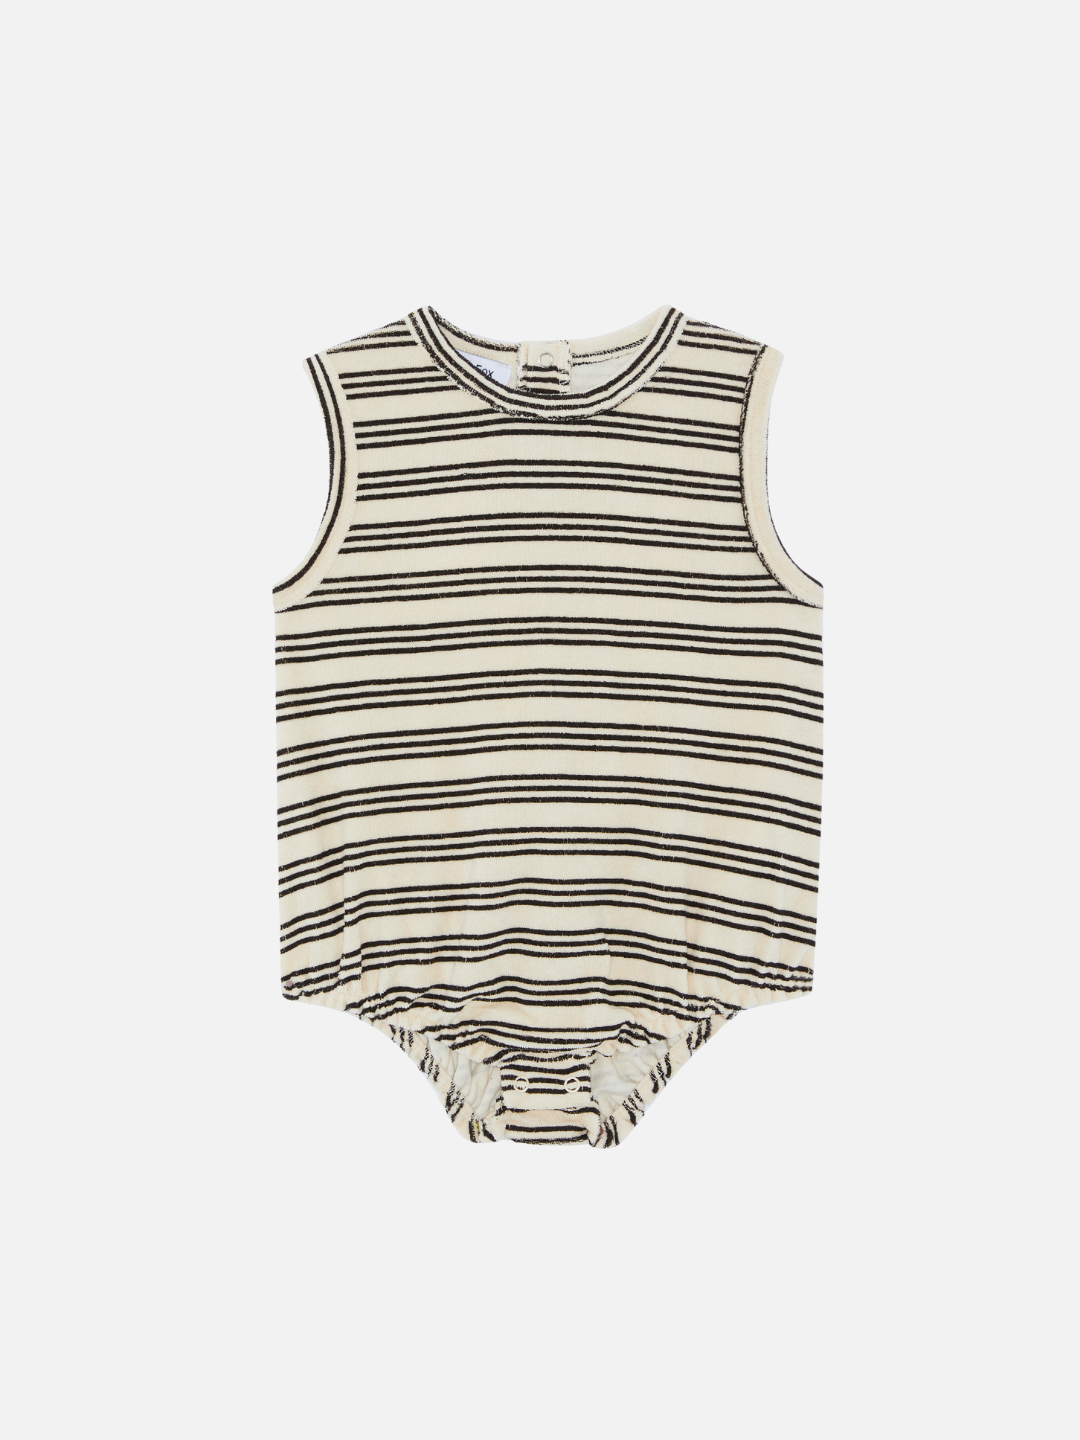 Stripe | Front view of the baby terry bubble bodysuit in stripe